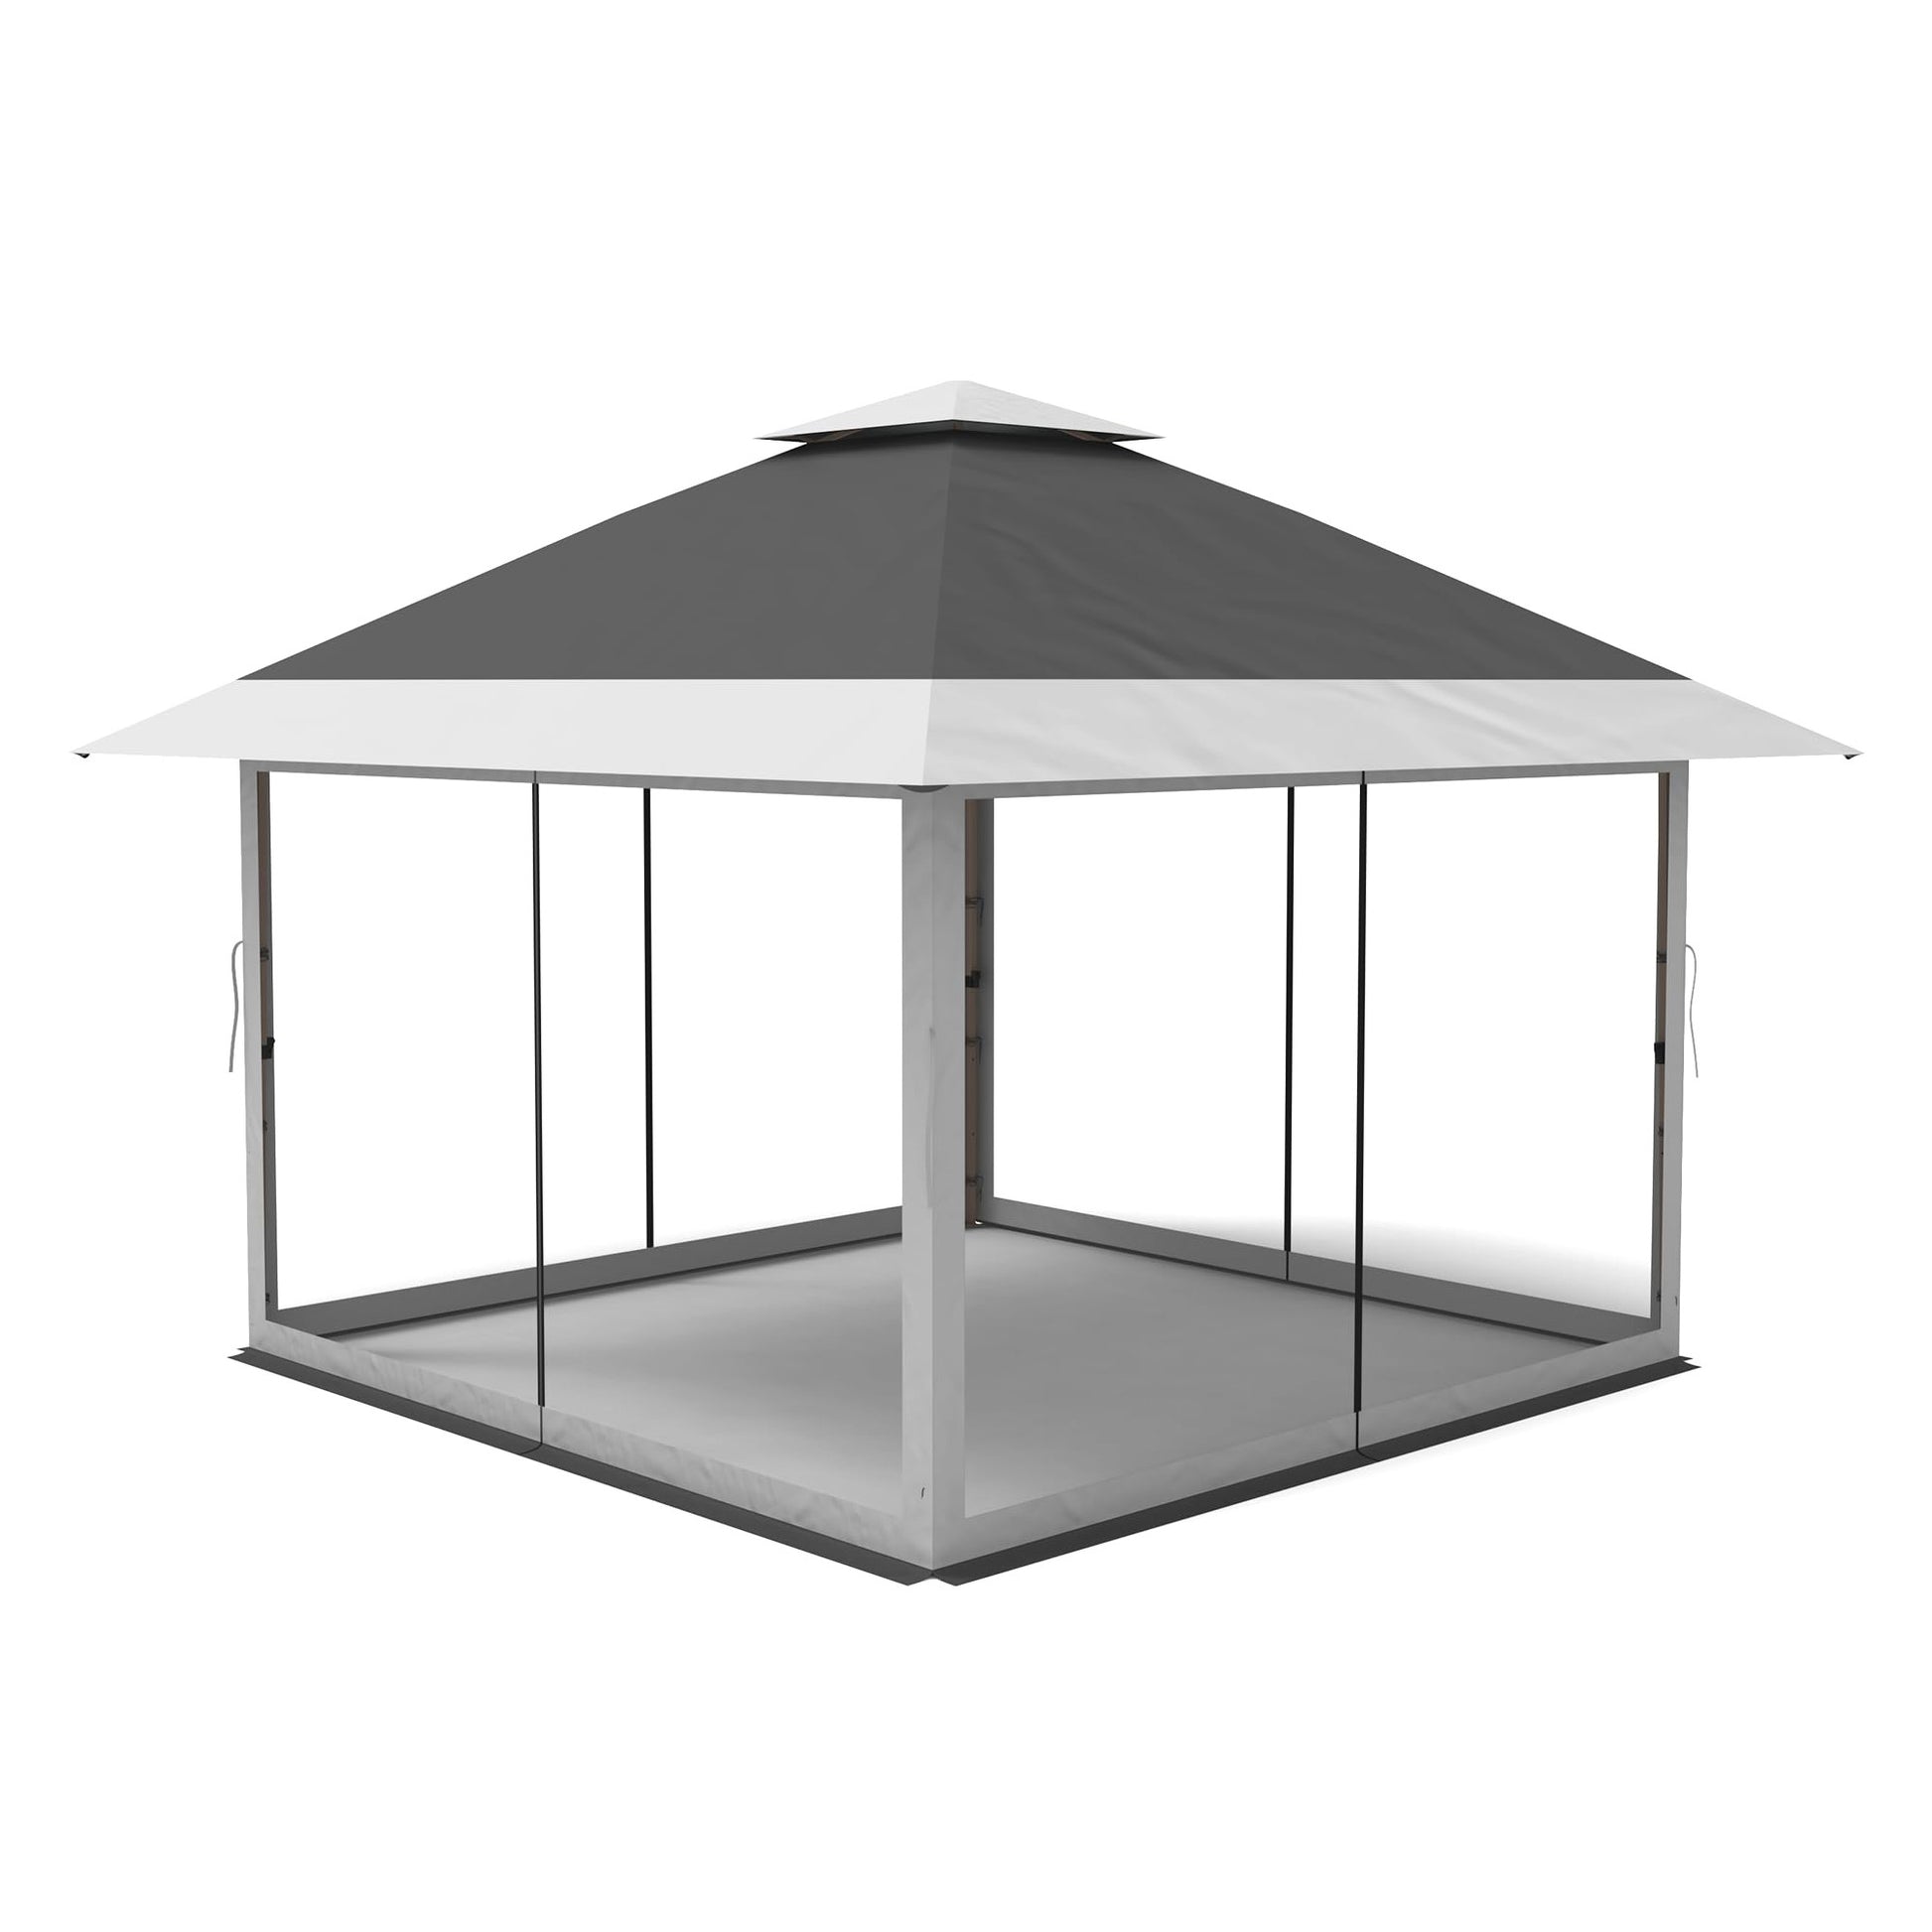 13x13FT Pop-up Canopy Tent, Mesh Sidewalls for Outdoor Events